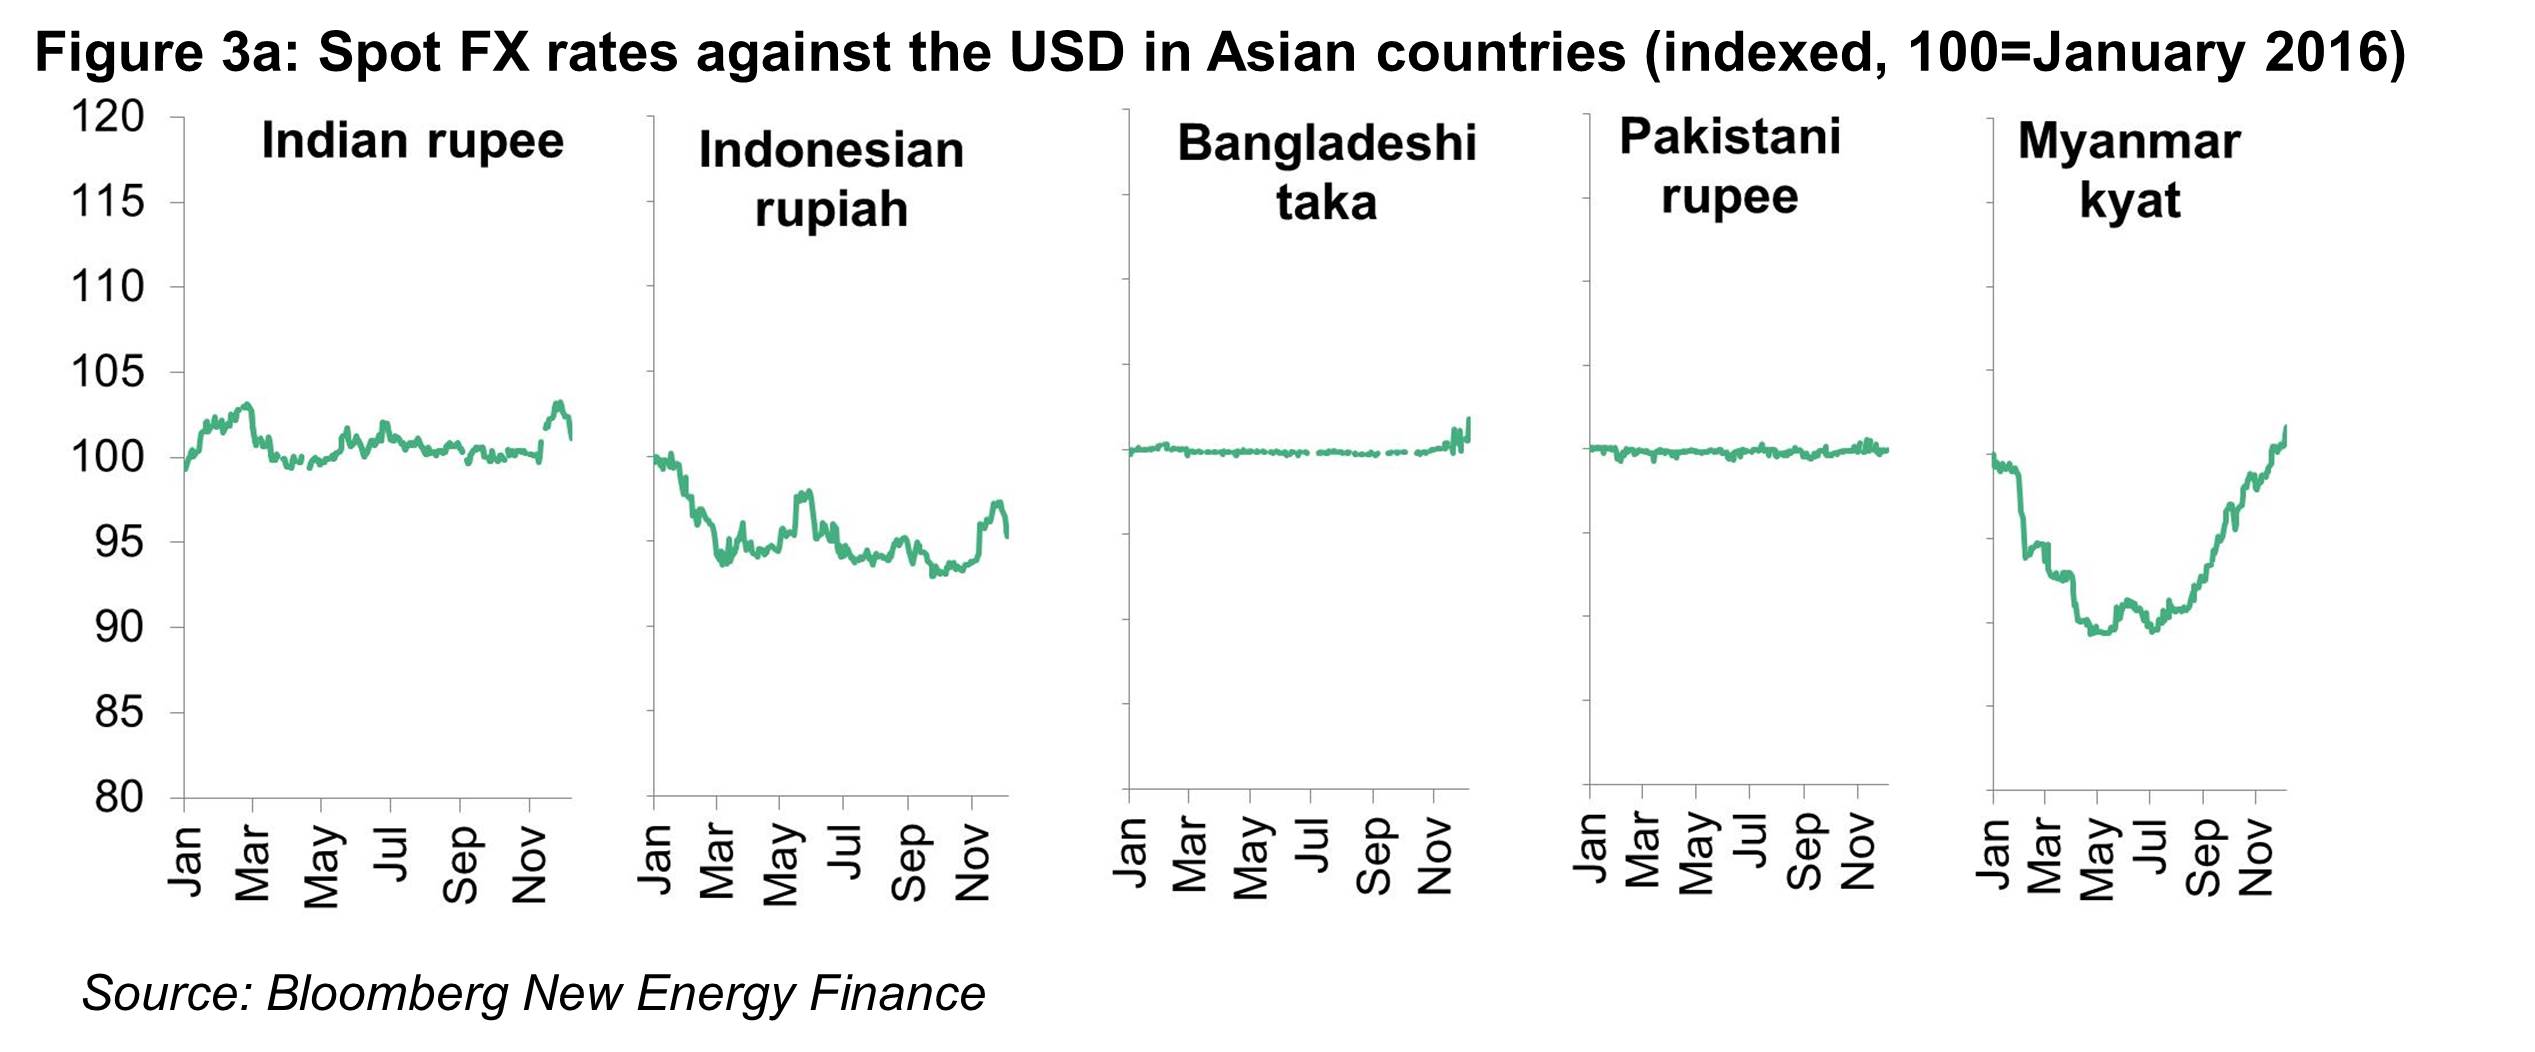 OG - Fig3 - Spot FX rates against the USD in Asian countries